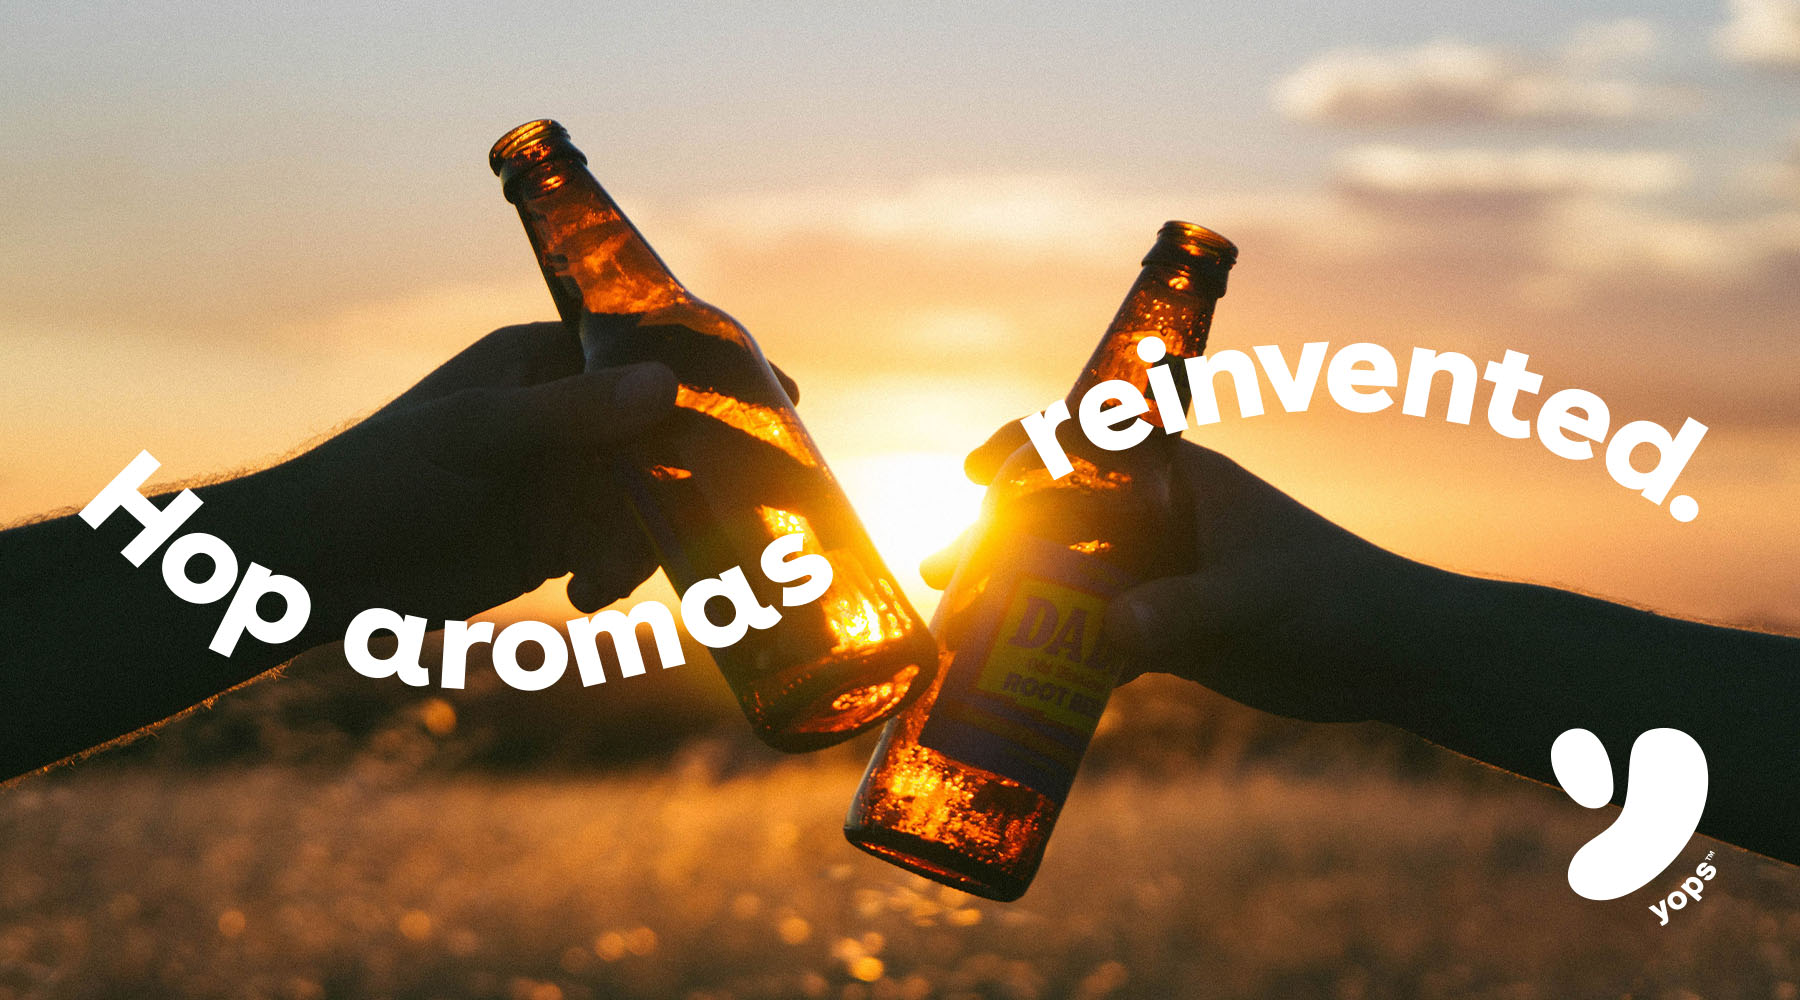 Two hands cheering with beer bottles in front of a sunset and a graphic layout